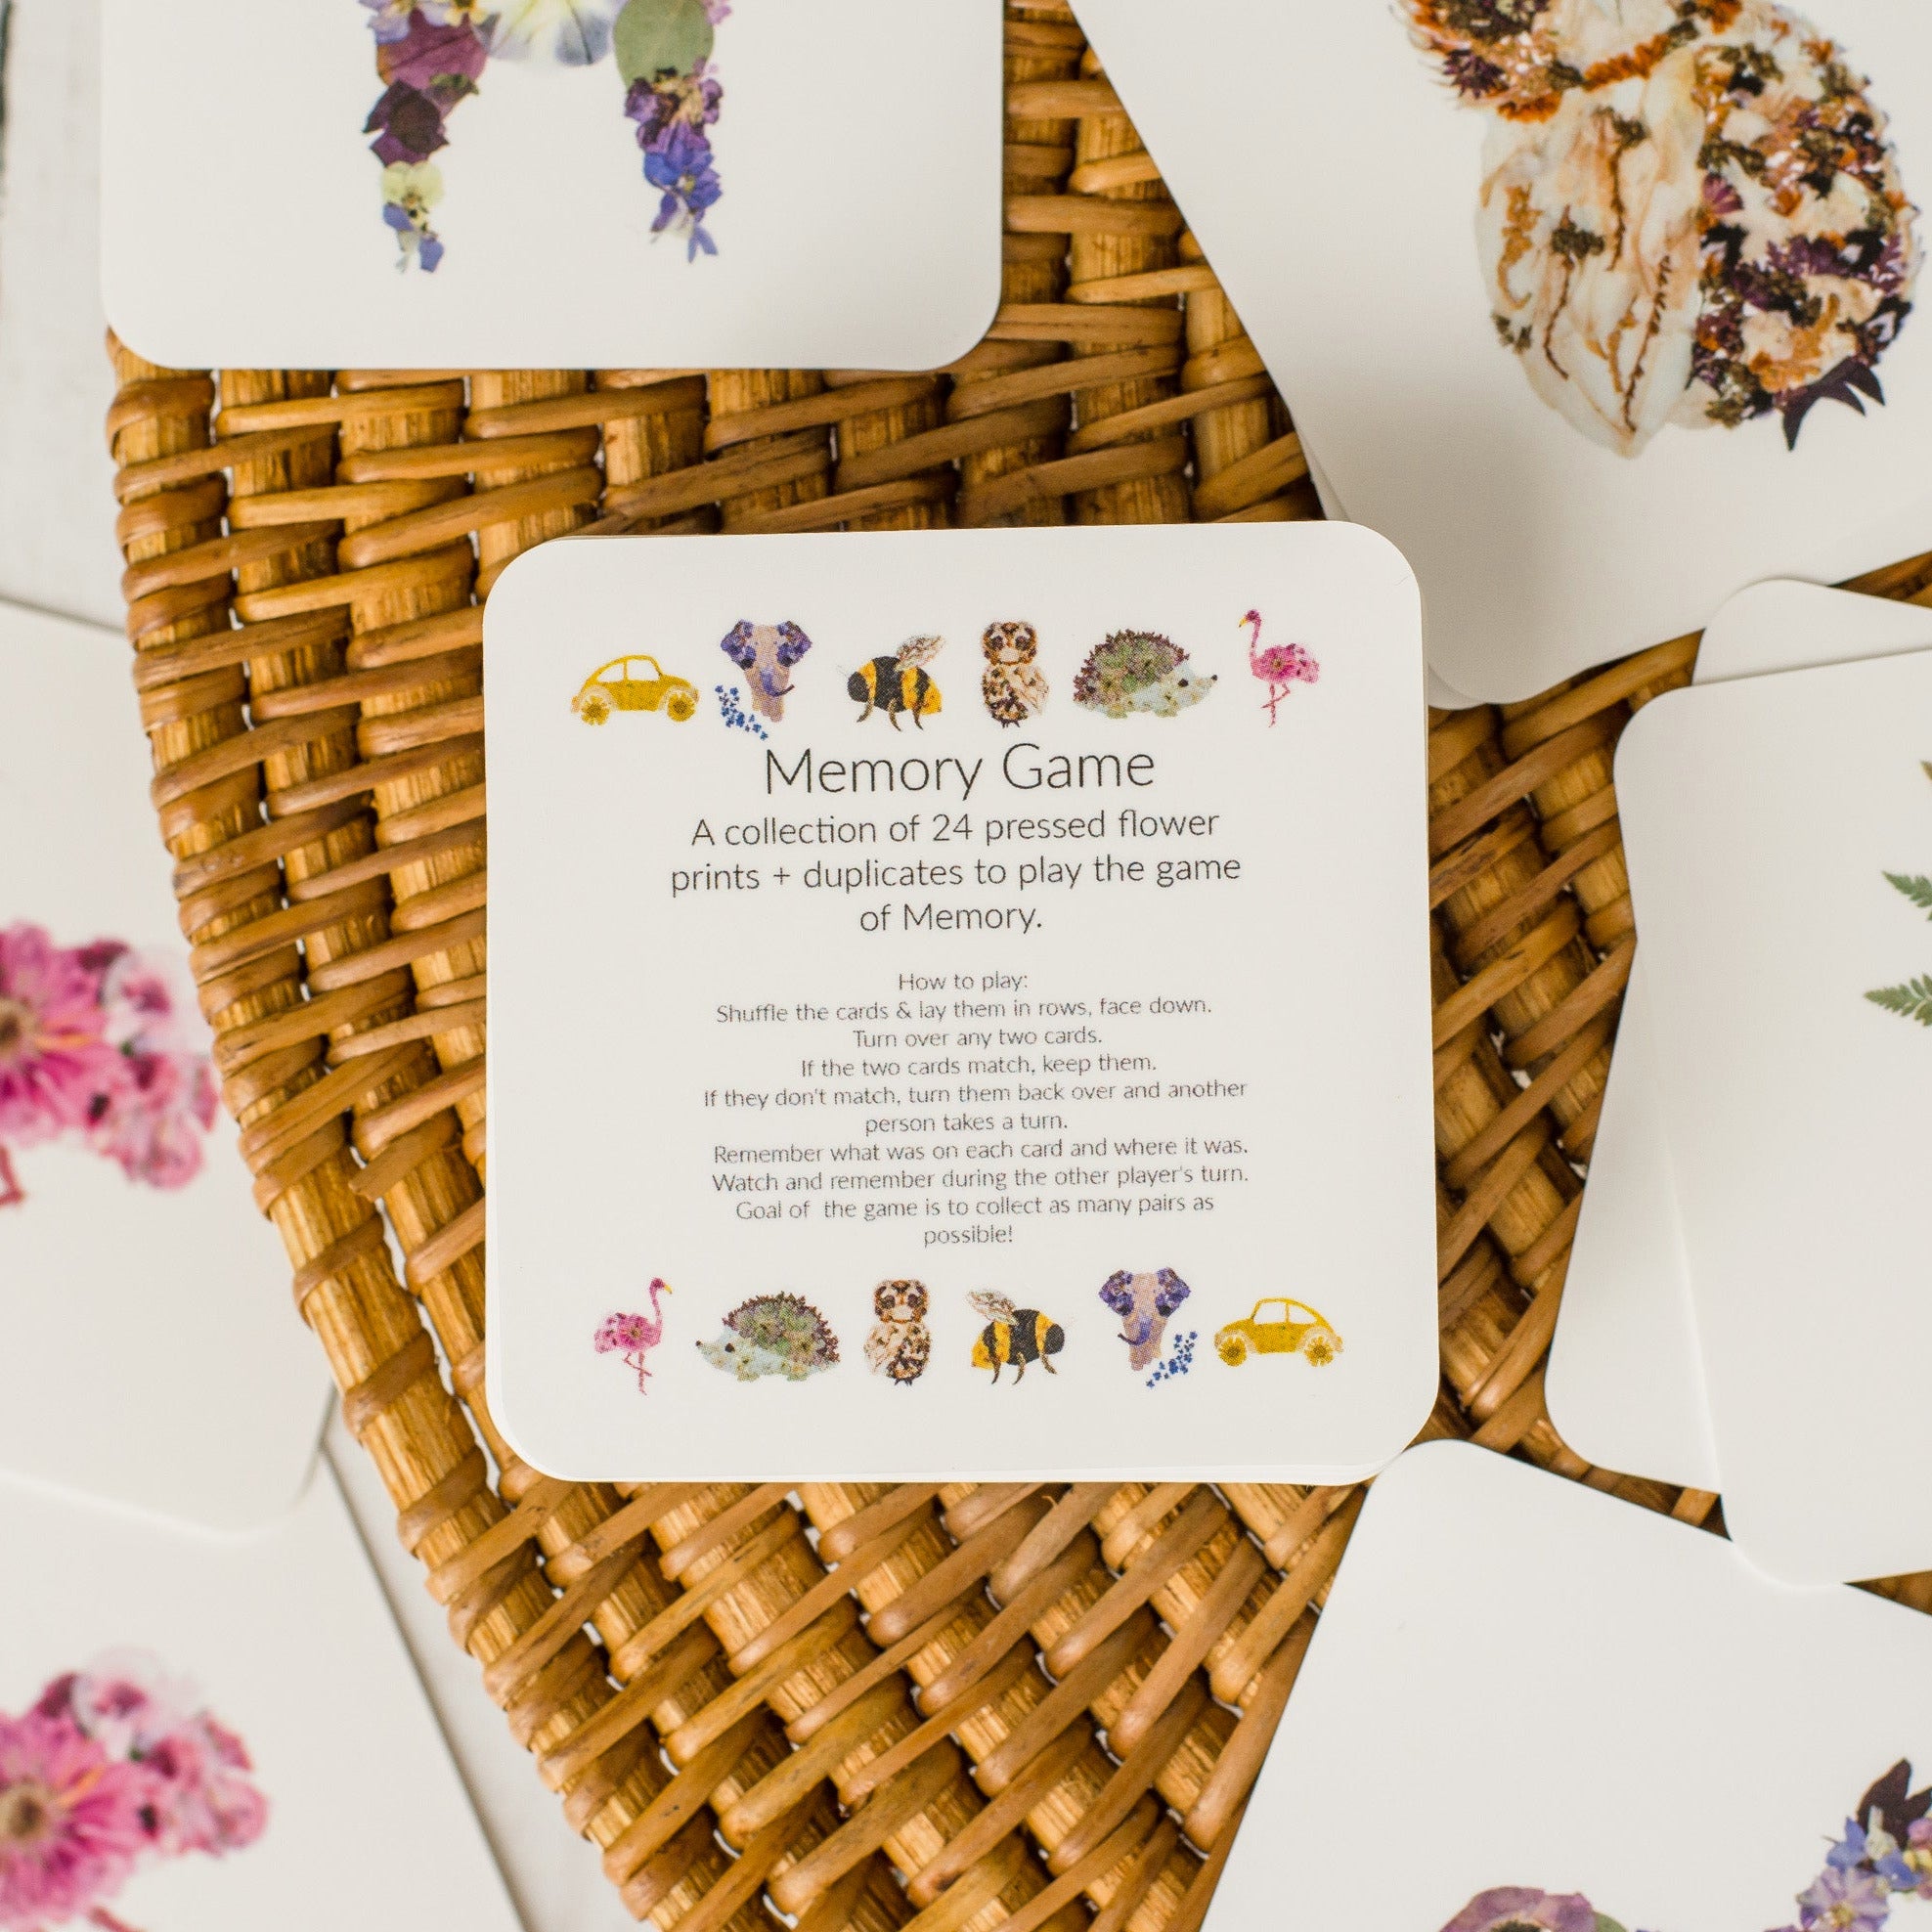 Memory game with pressed flower prints